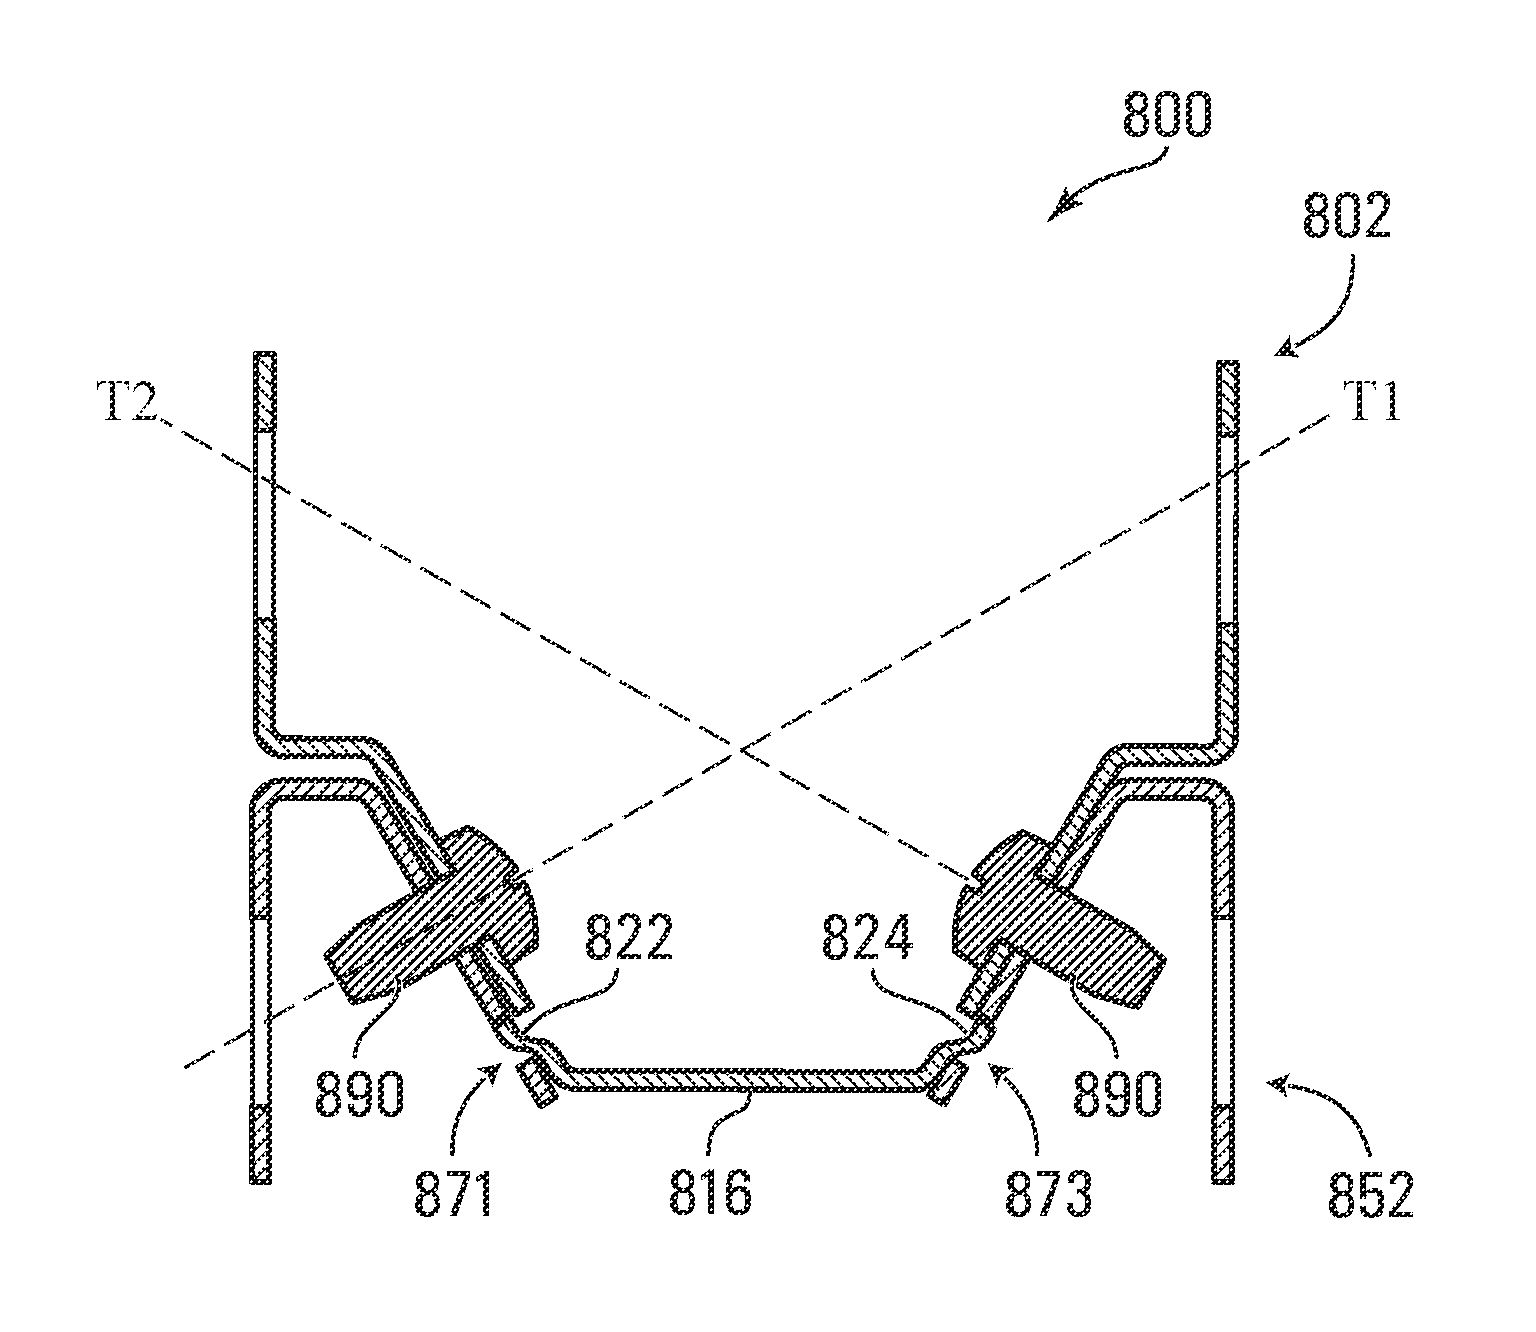 Connector system and building components for use in building construction